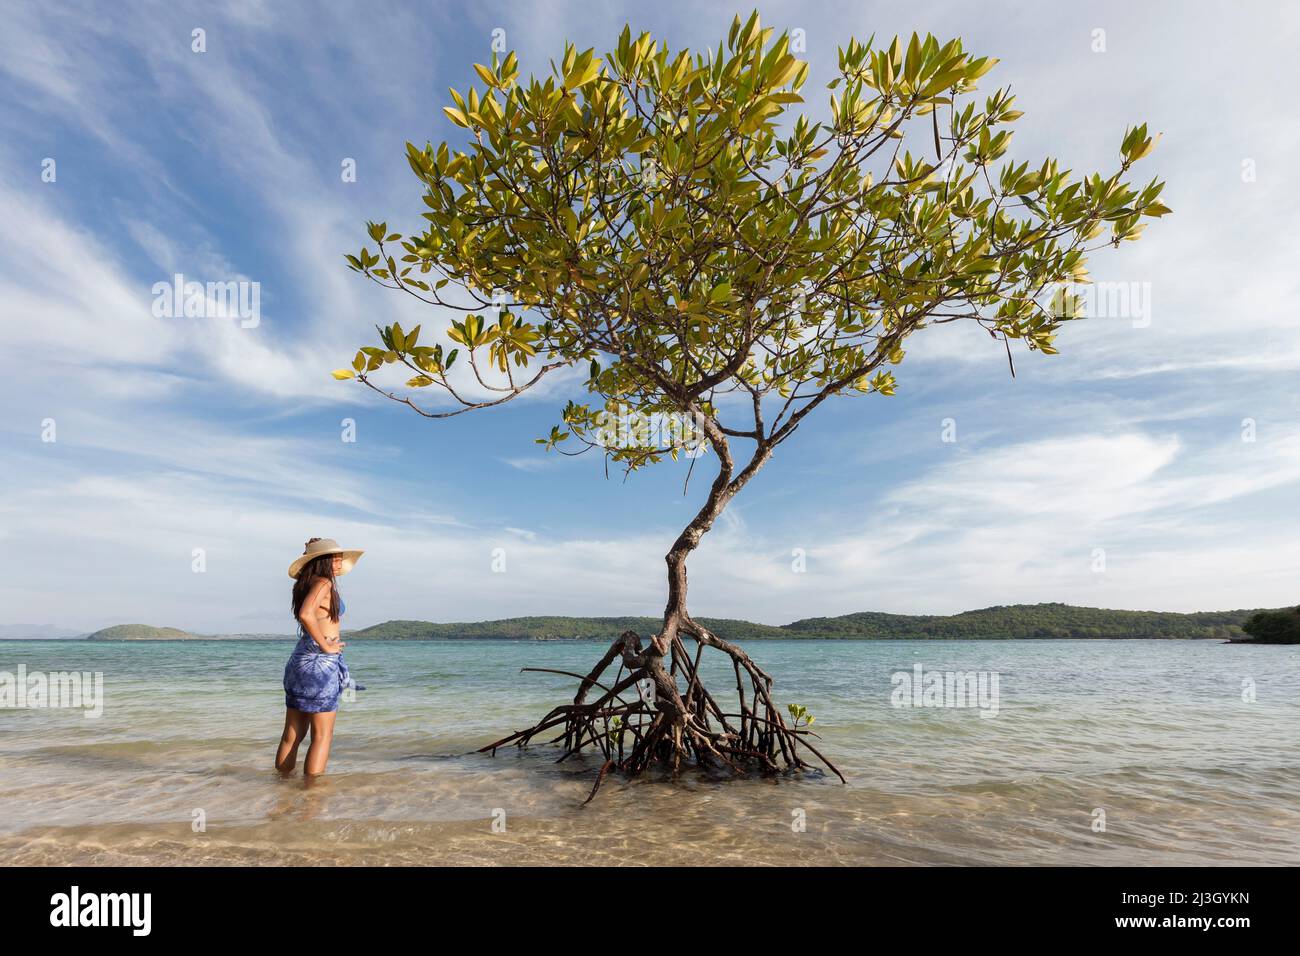 Philippines, Palawan, Calamianes Archipelago, Popototan Island, young Filipino woman observing a mangrove tree growing on the beach Stock Photo